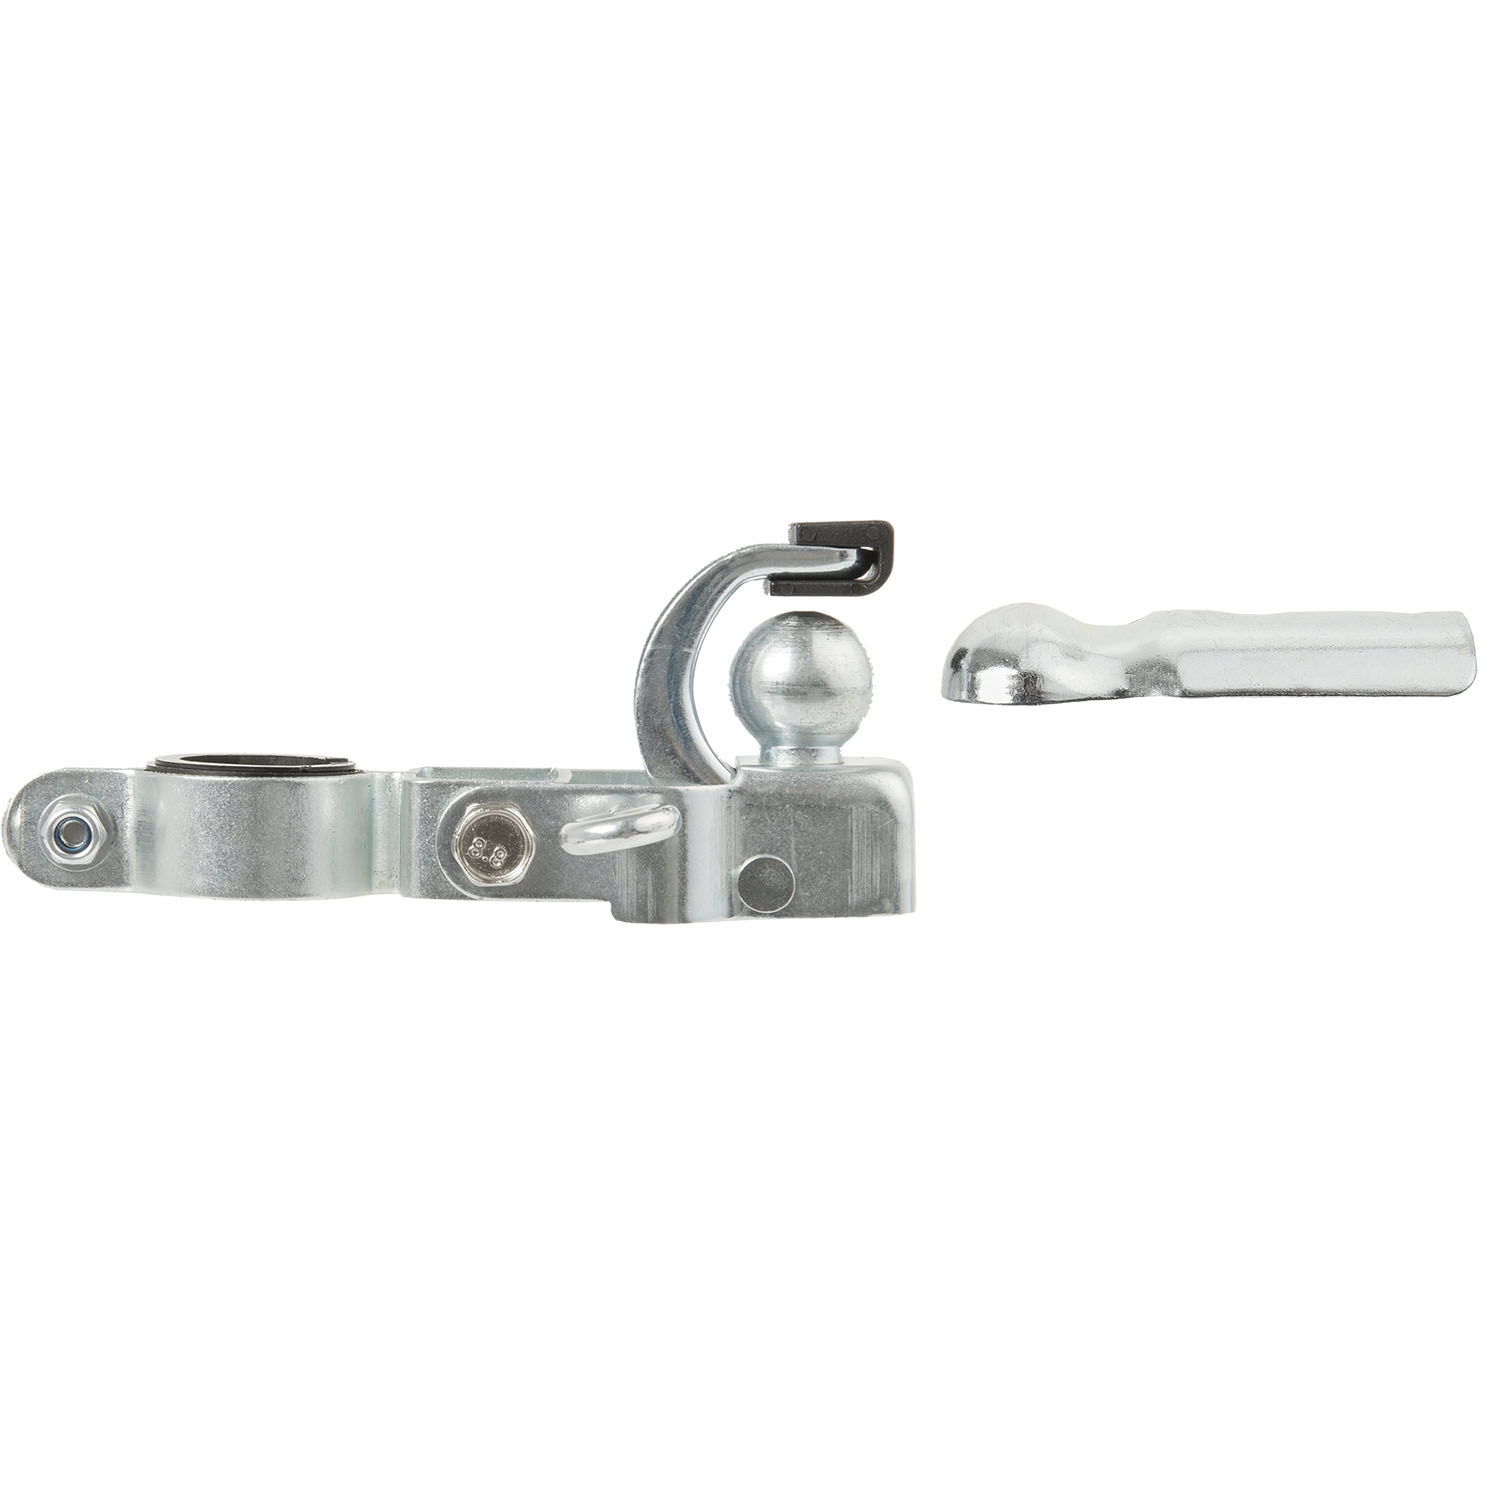 640071 VENTURA Universal trailer hitch – AVAILABLE IN SELECTED BIKE SHOP